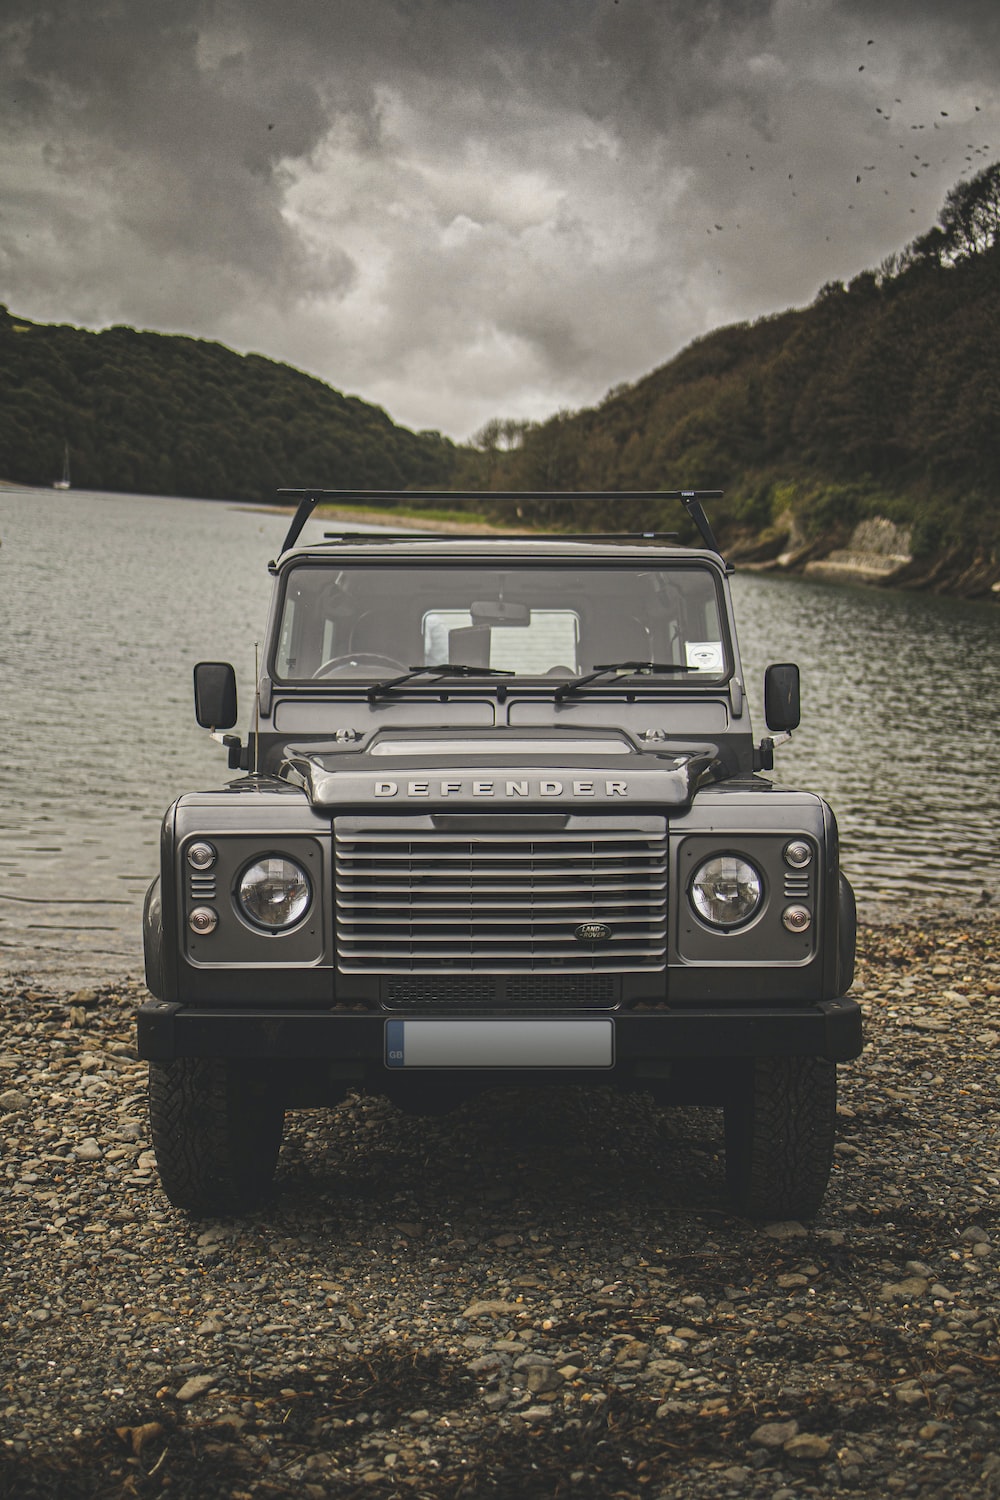 Defender Picture. Download Free Image